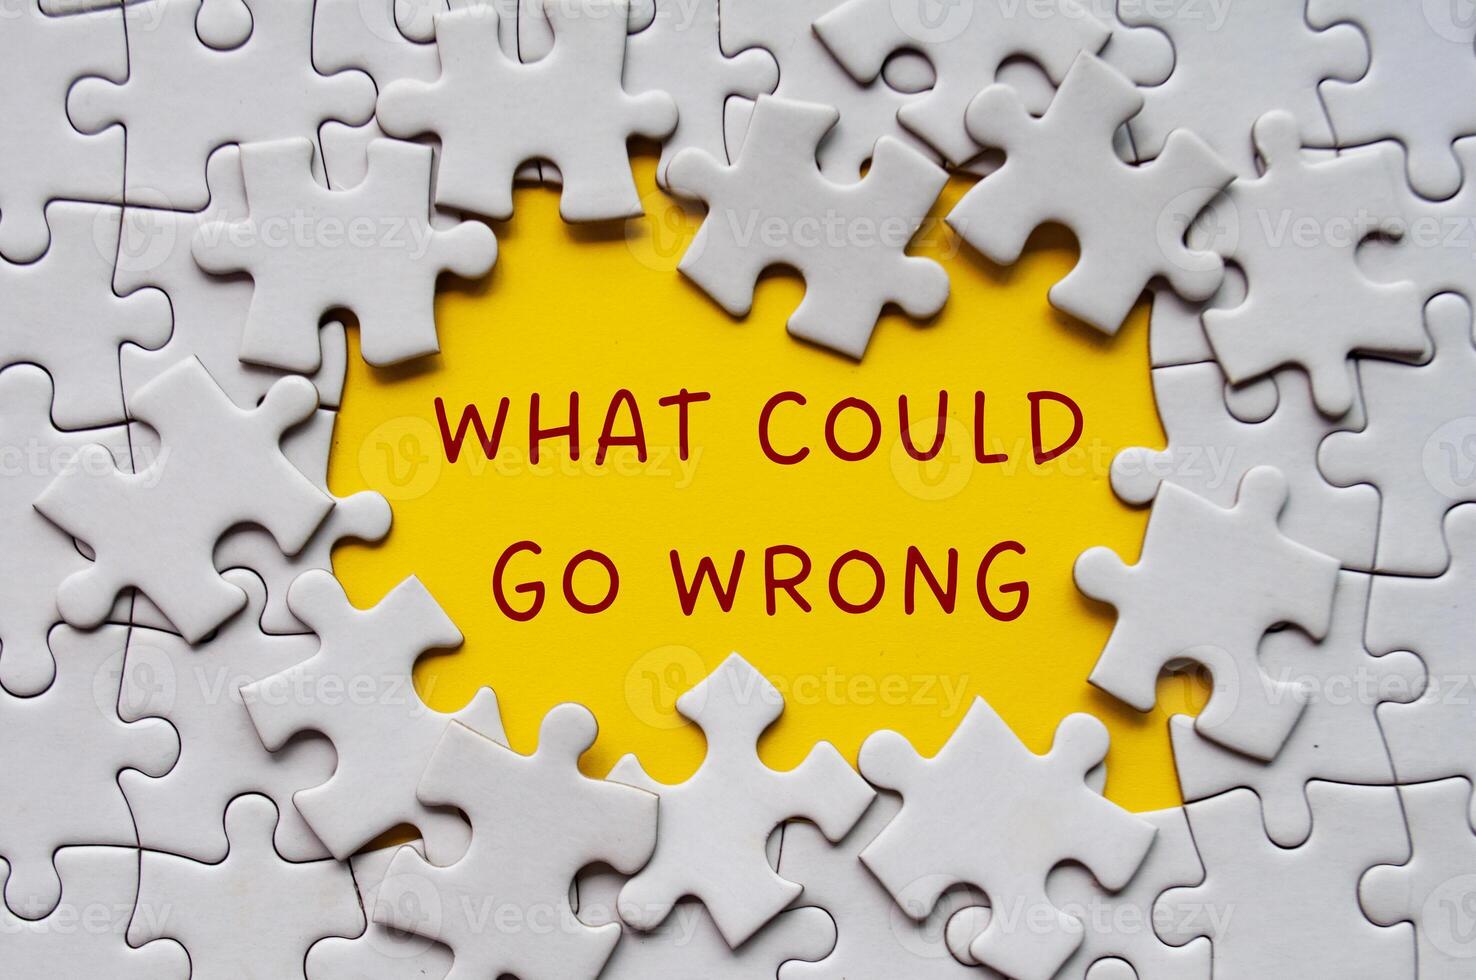 What could go wrong text on missing jigsaw puzzle. Solution concept photo